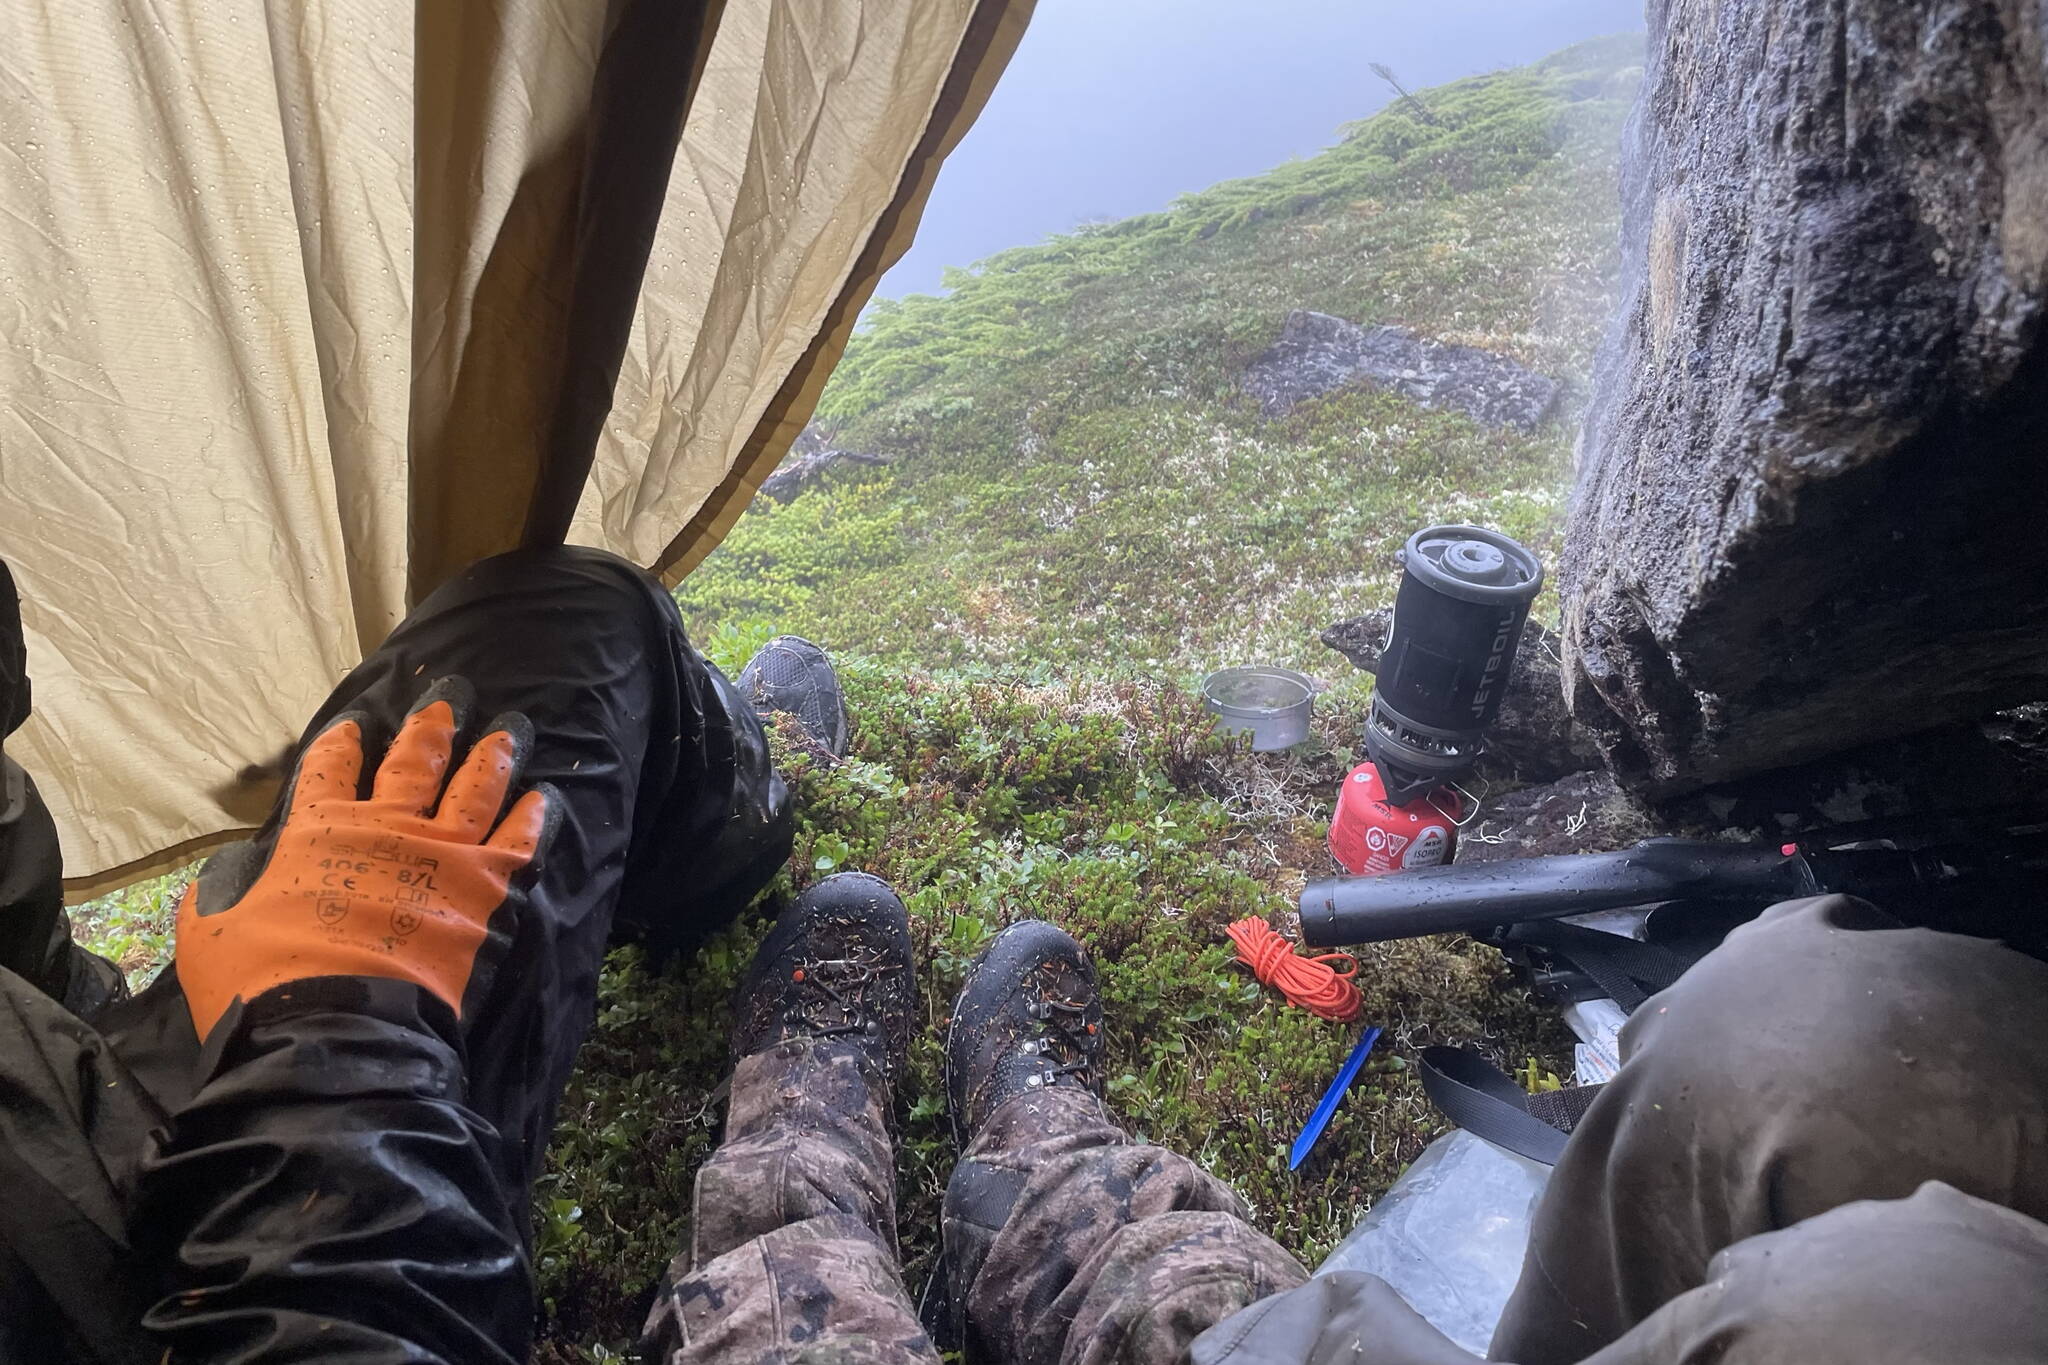 The author, his wife Abby and his friend Danny wait out the weather under a rock and a tarp on opening day of deer season. (Photo by Jeff Lund)